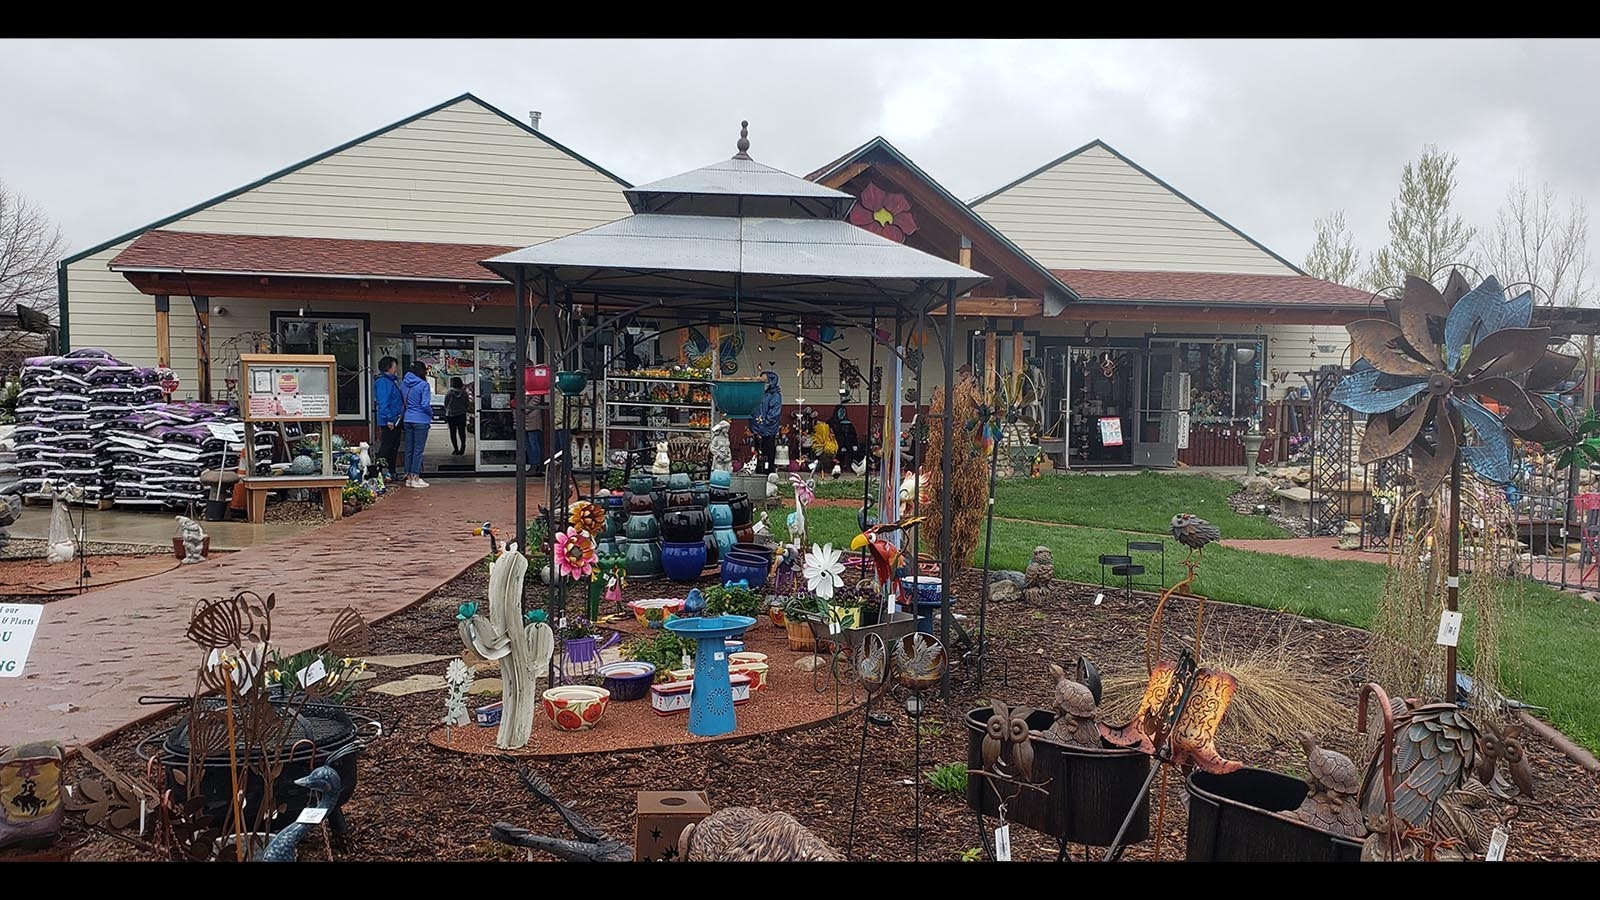 Even outside Landon's Greenhouse is packed with great stuff for the yard and garden.